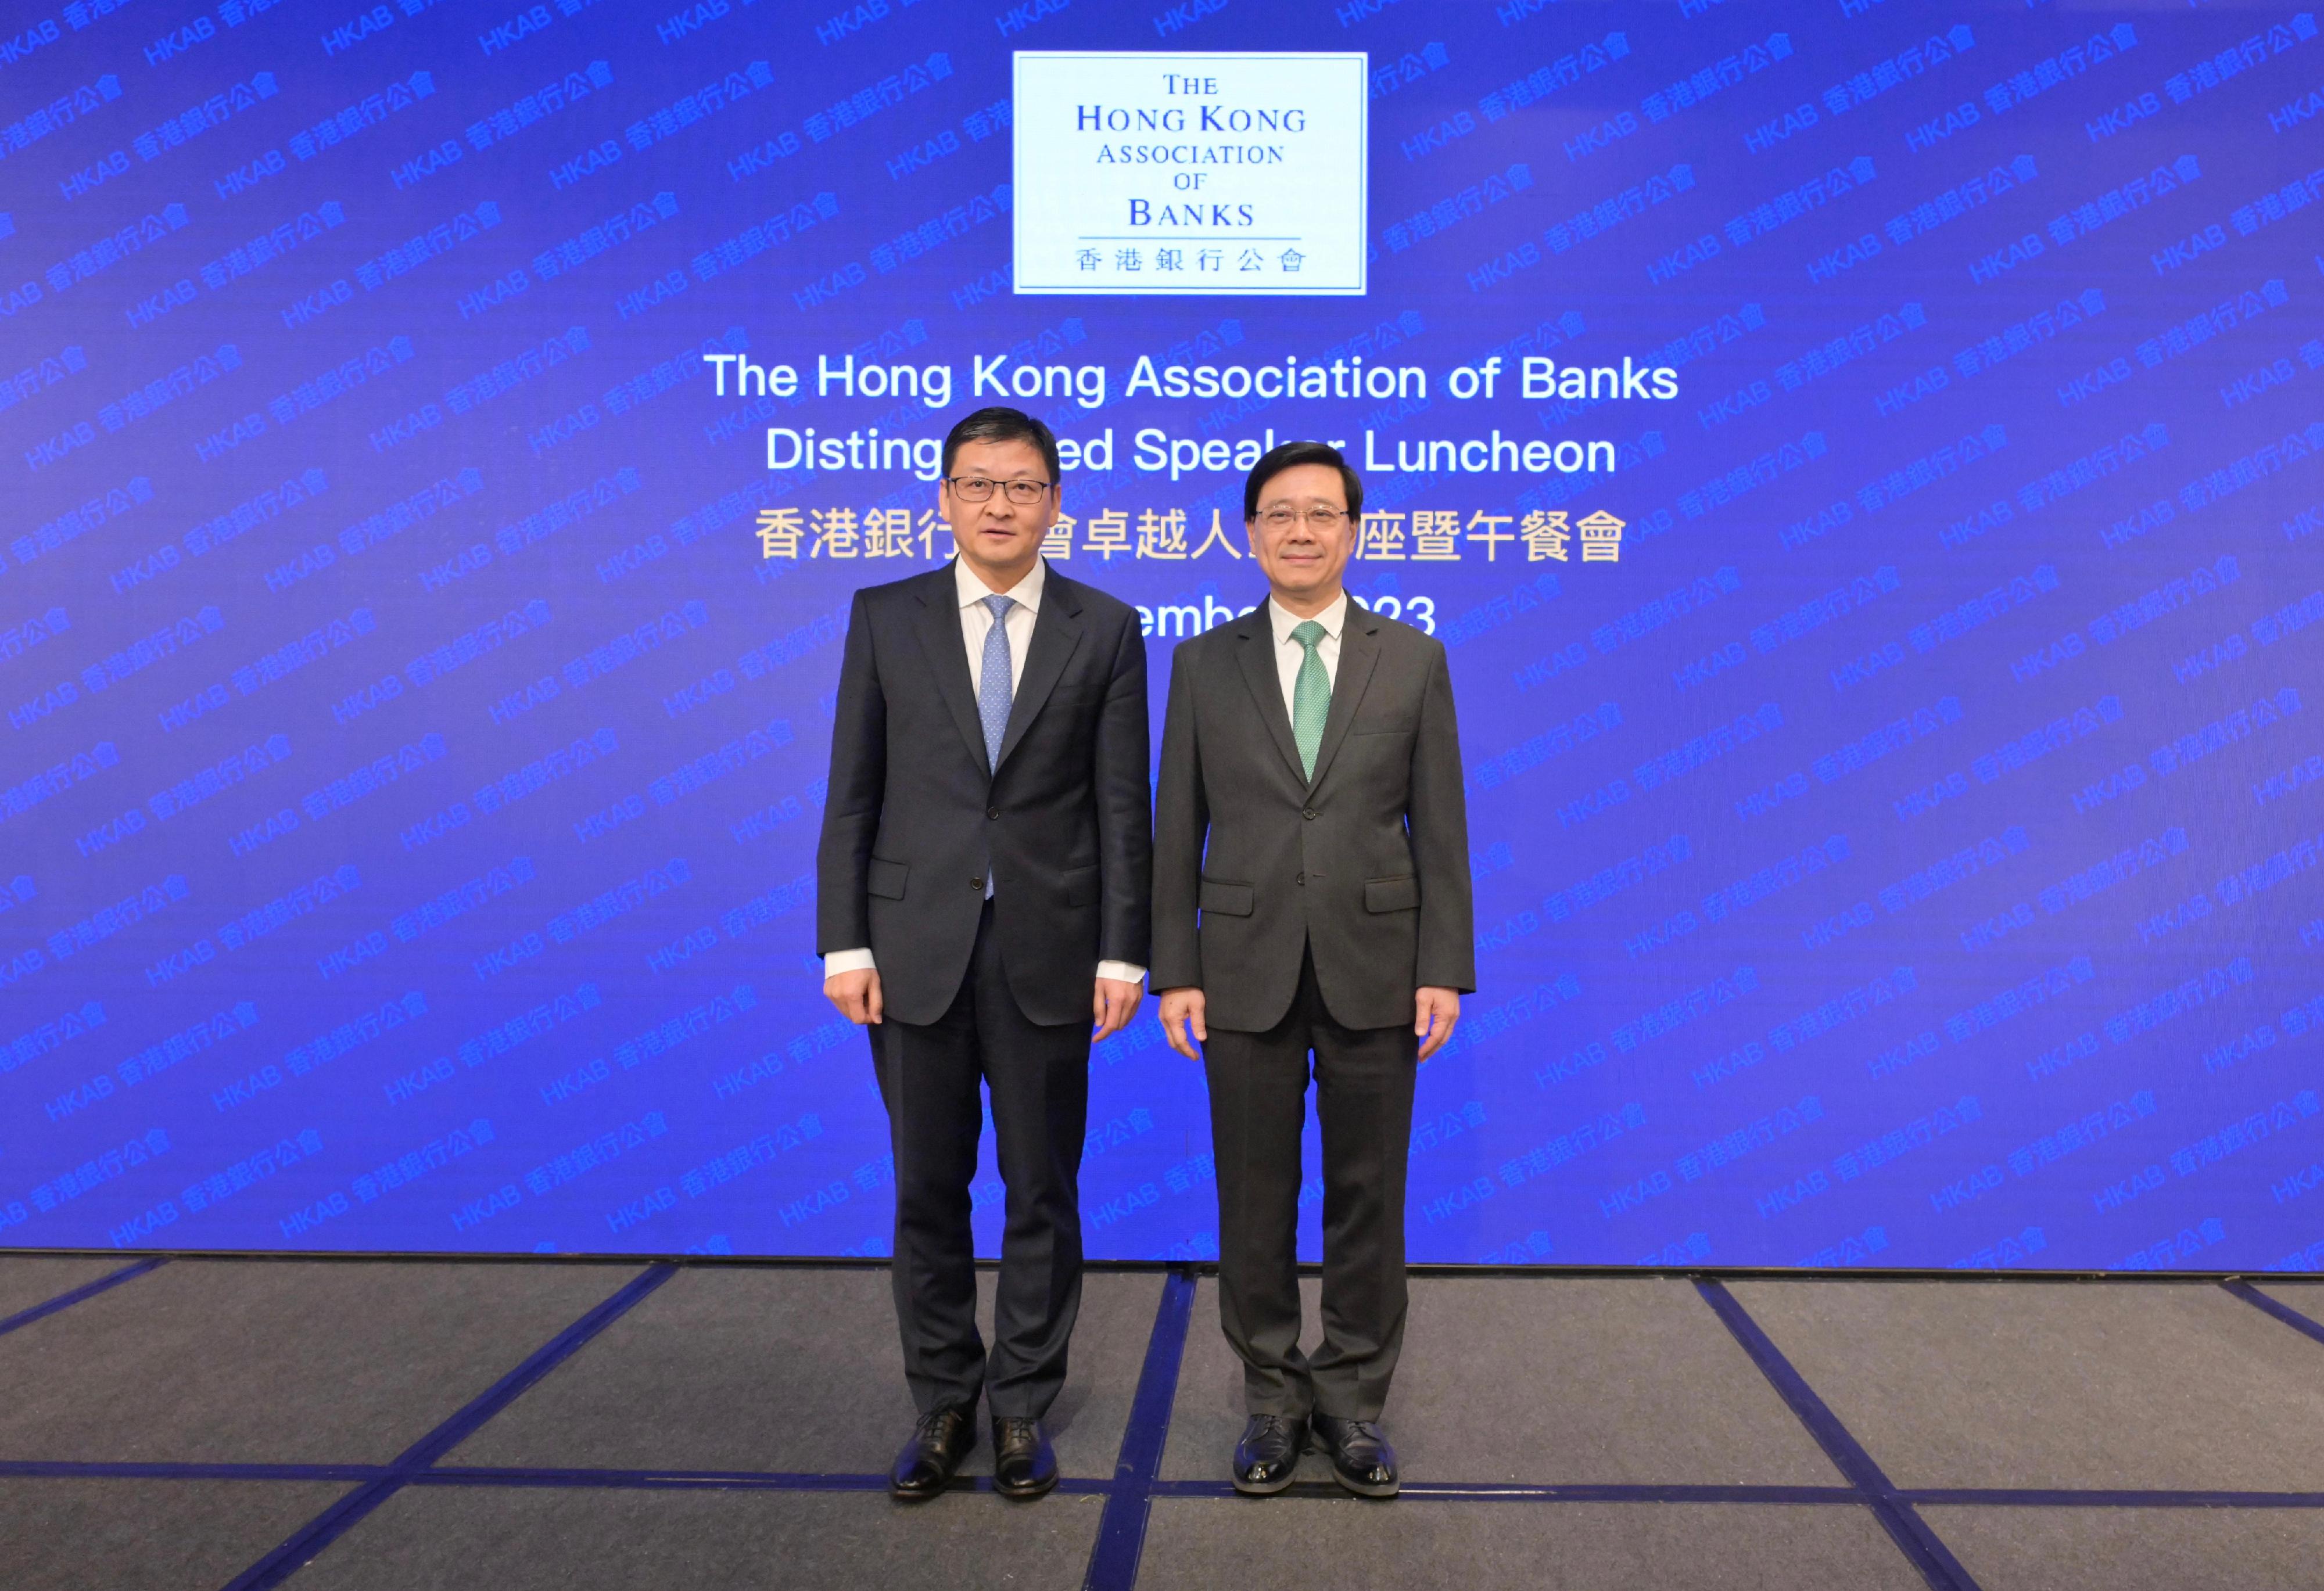 The Chief Executive, Mr John Lee, attended the Hong Kong Association of Banks (HKAB) Distinguished Speaker Luncheon today (November 24). Photo shows Mr Lee (right) with the Chairperson of the HKAB, Mr Sun Yu (left), at the luncheon.